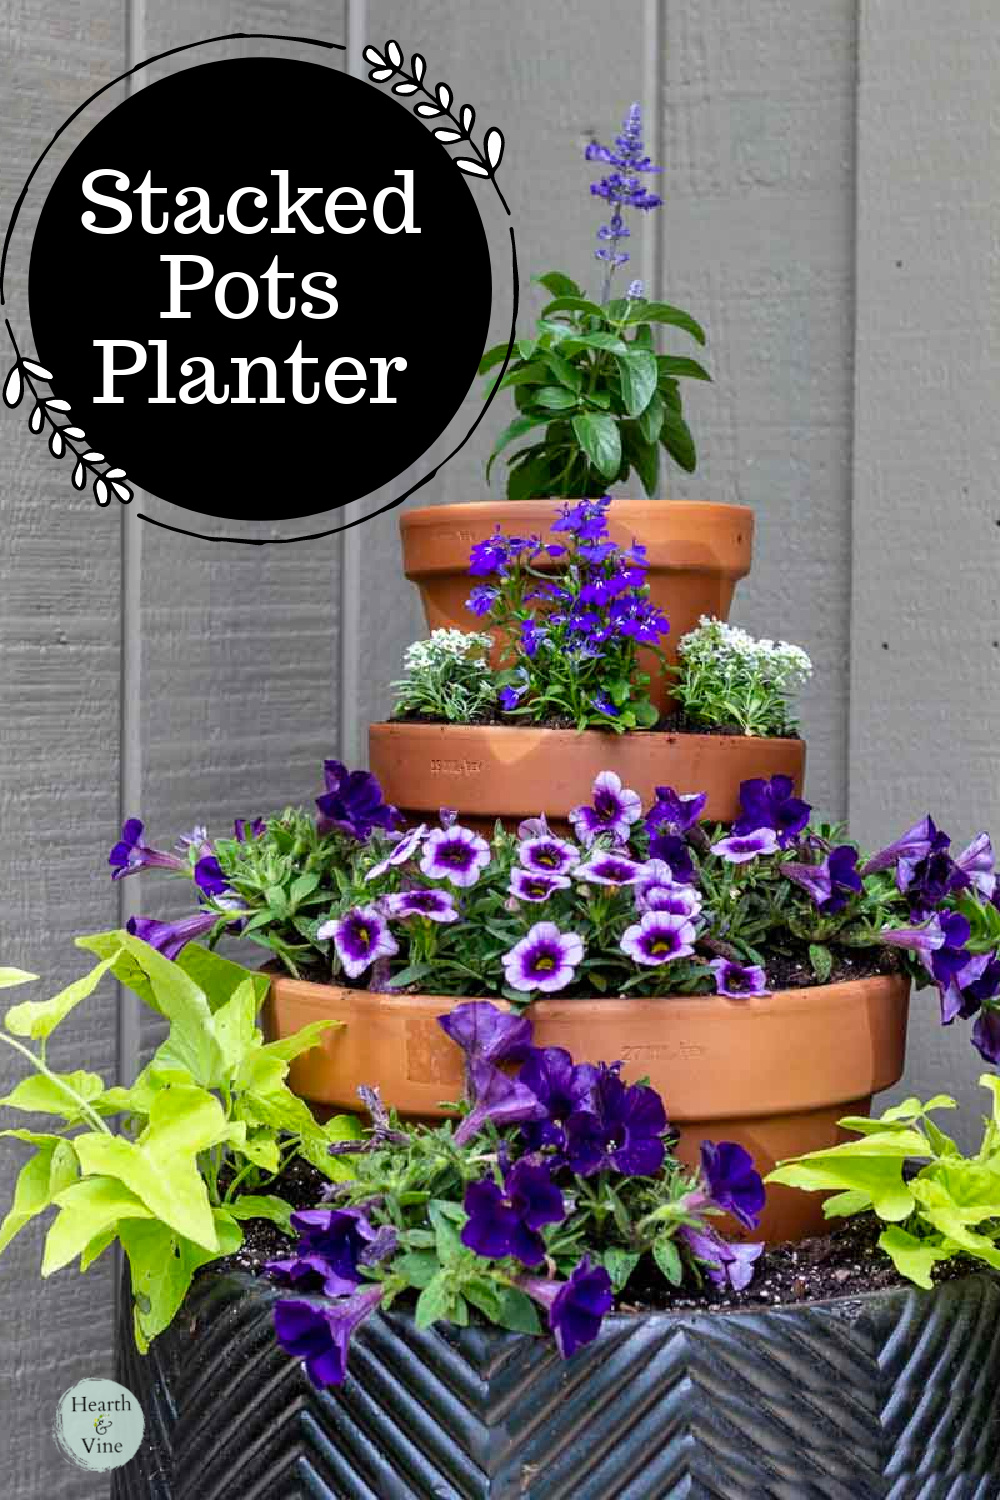 Stacked clay pots with annual flowers. Salvia, purple million bells, chartreus sweet potato vines and supertunias.